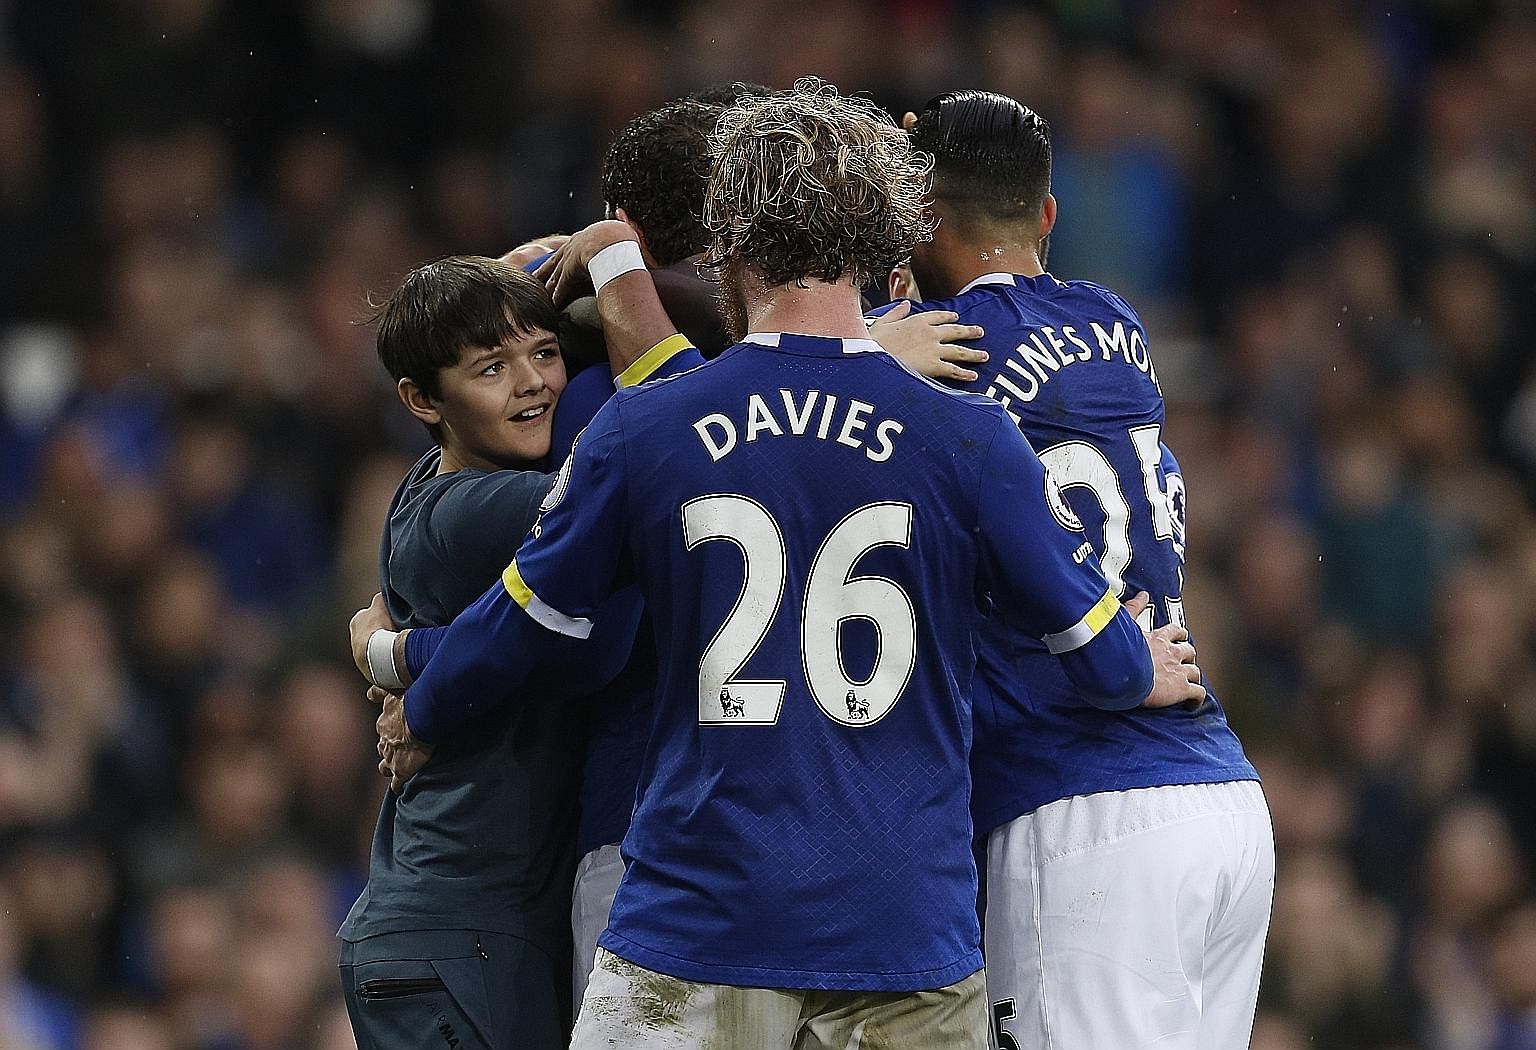 A young Everton fan invades the pitch to celebrate with Romelu Lukaku after the striker scored the club's last goal in the 3-0 victory against West Bromwich Albion in their Premier League encounter on March 11.